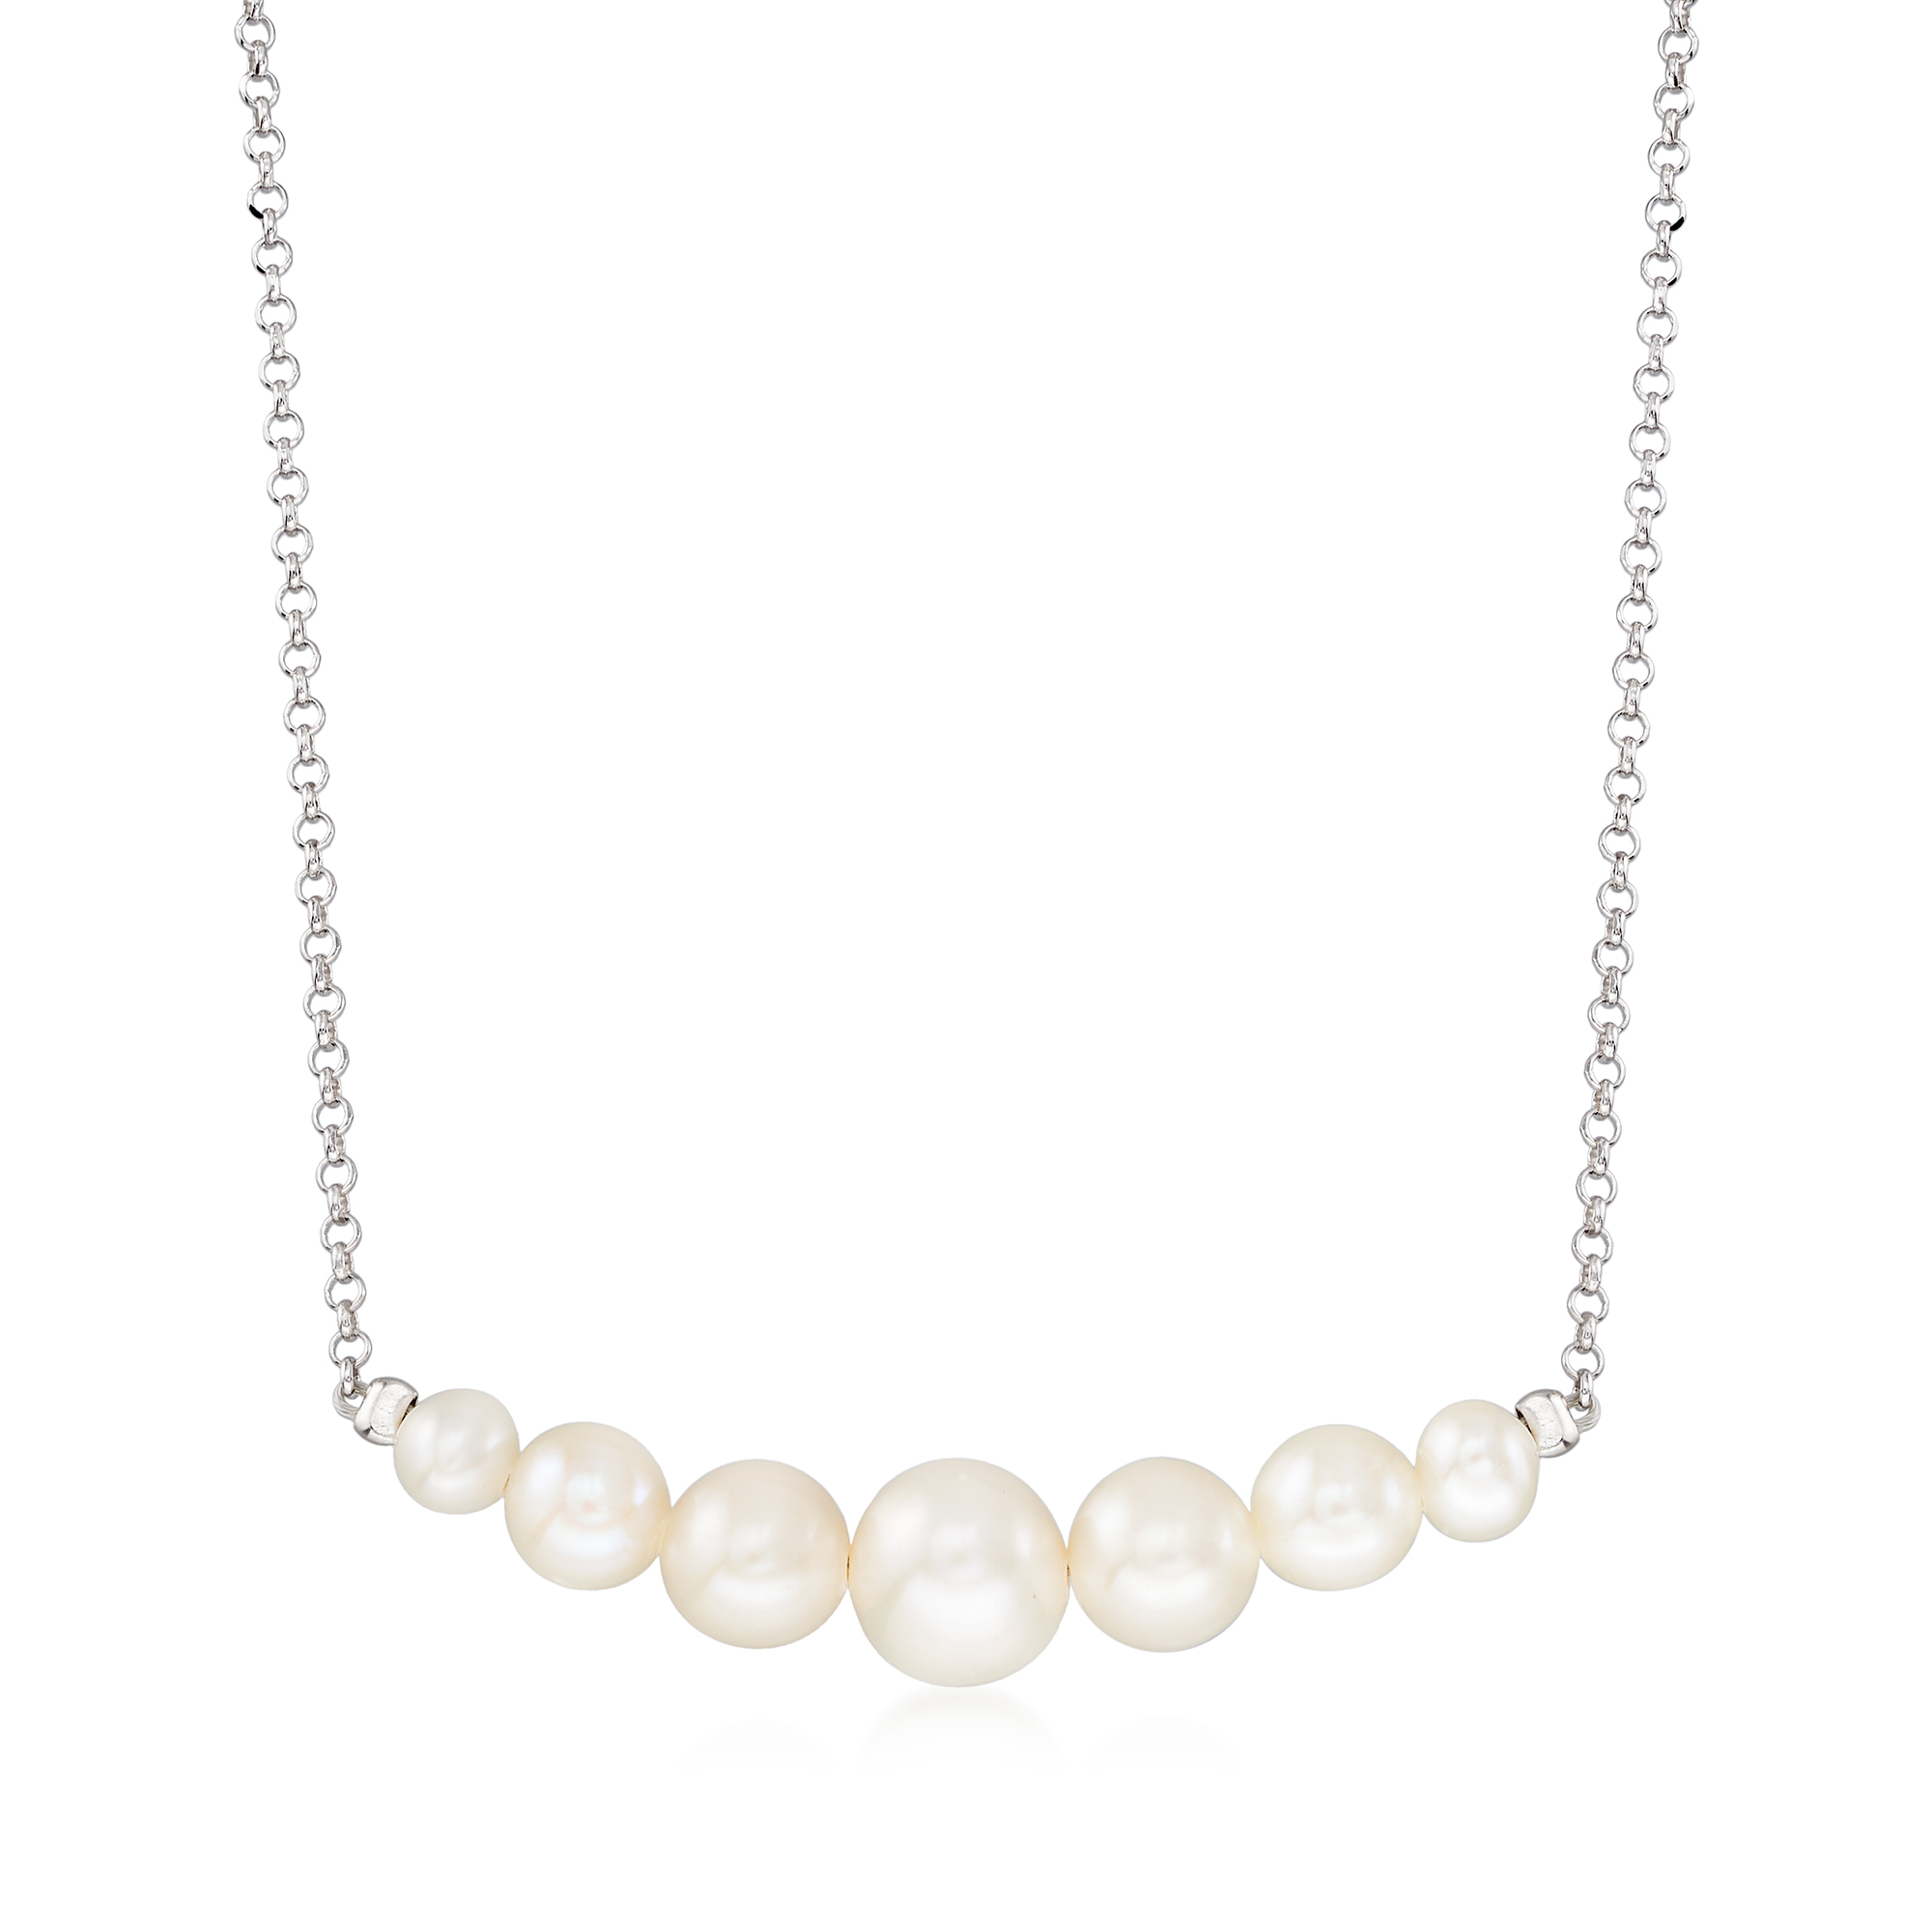 4-8mm Cultured Pearl Necklace in Sterling Silver. 18